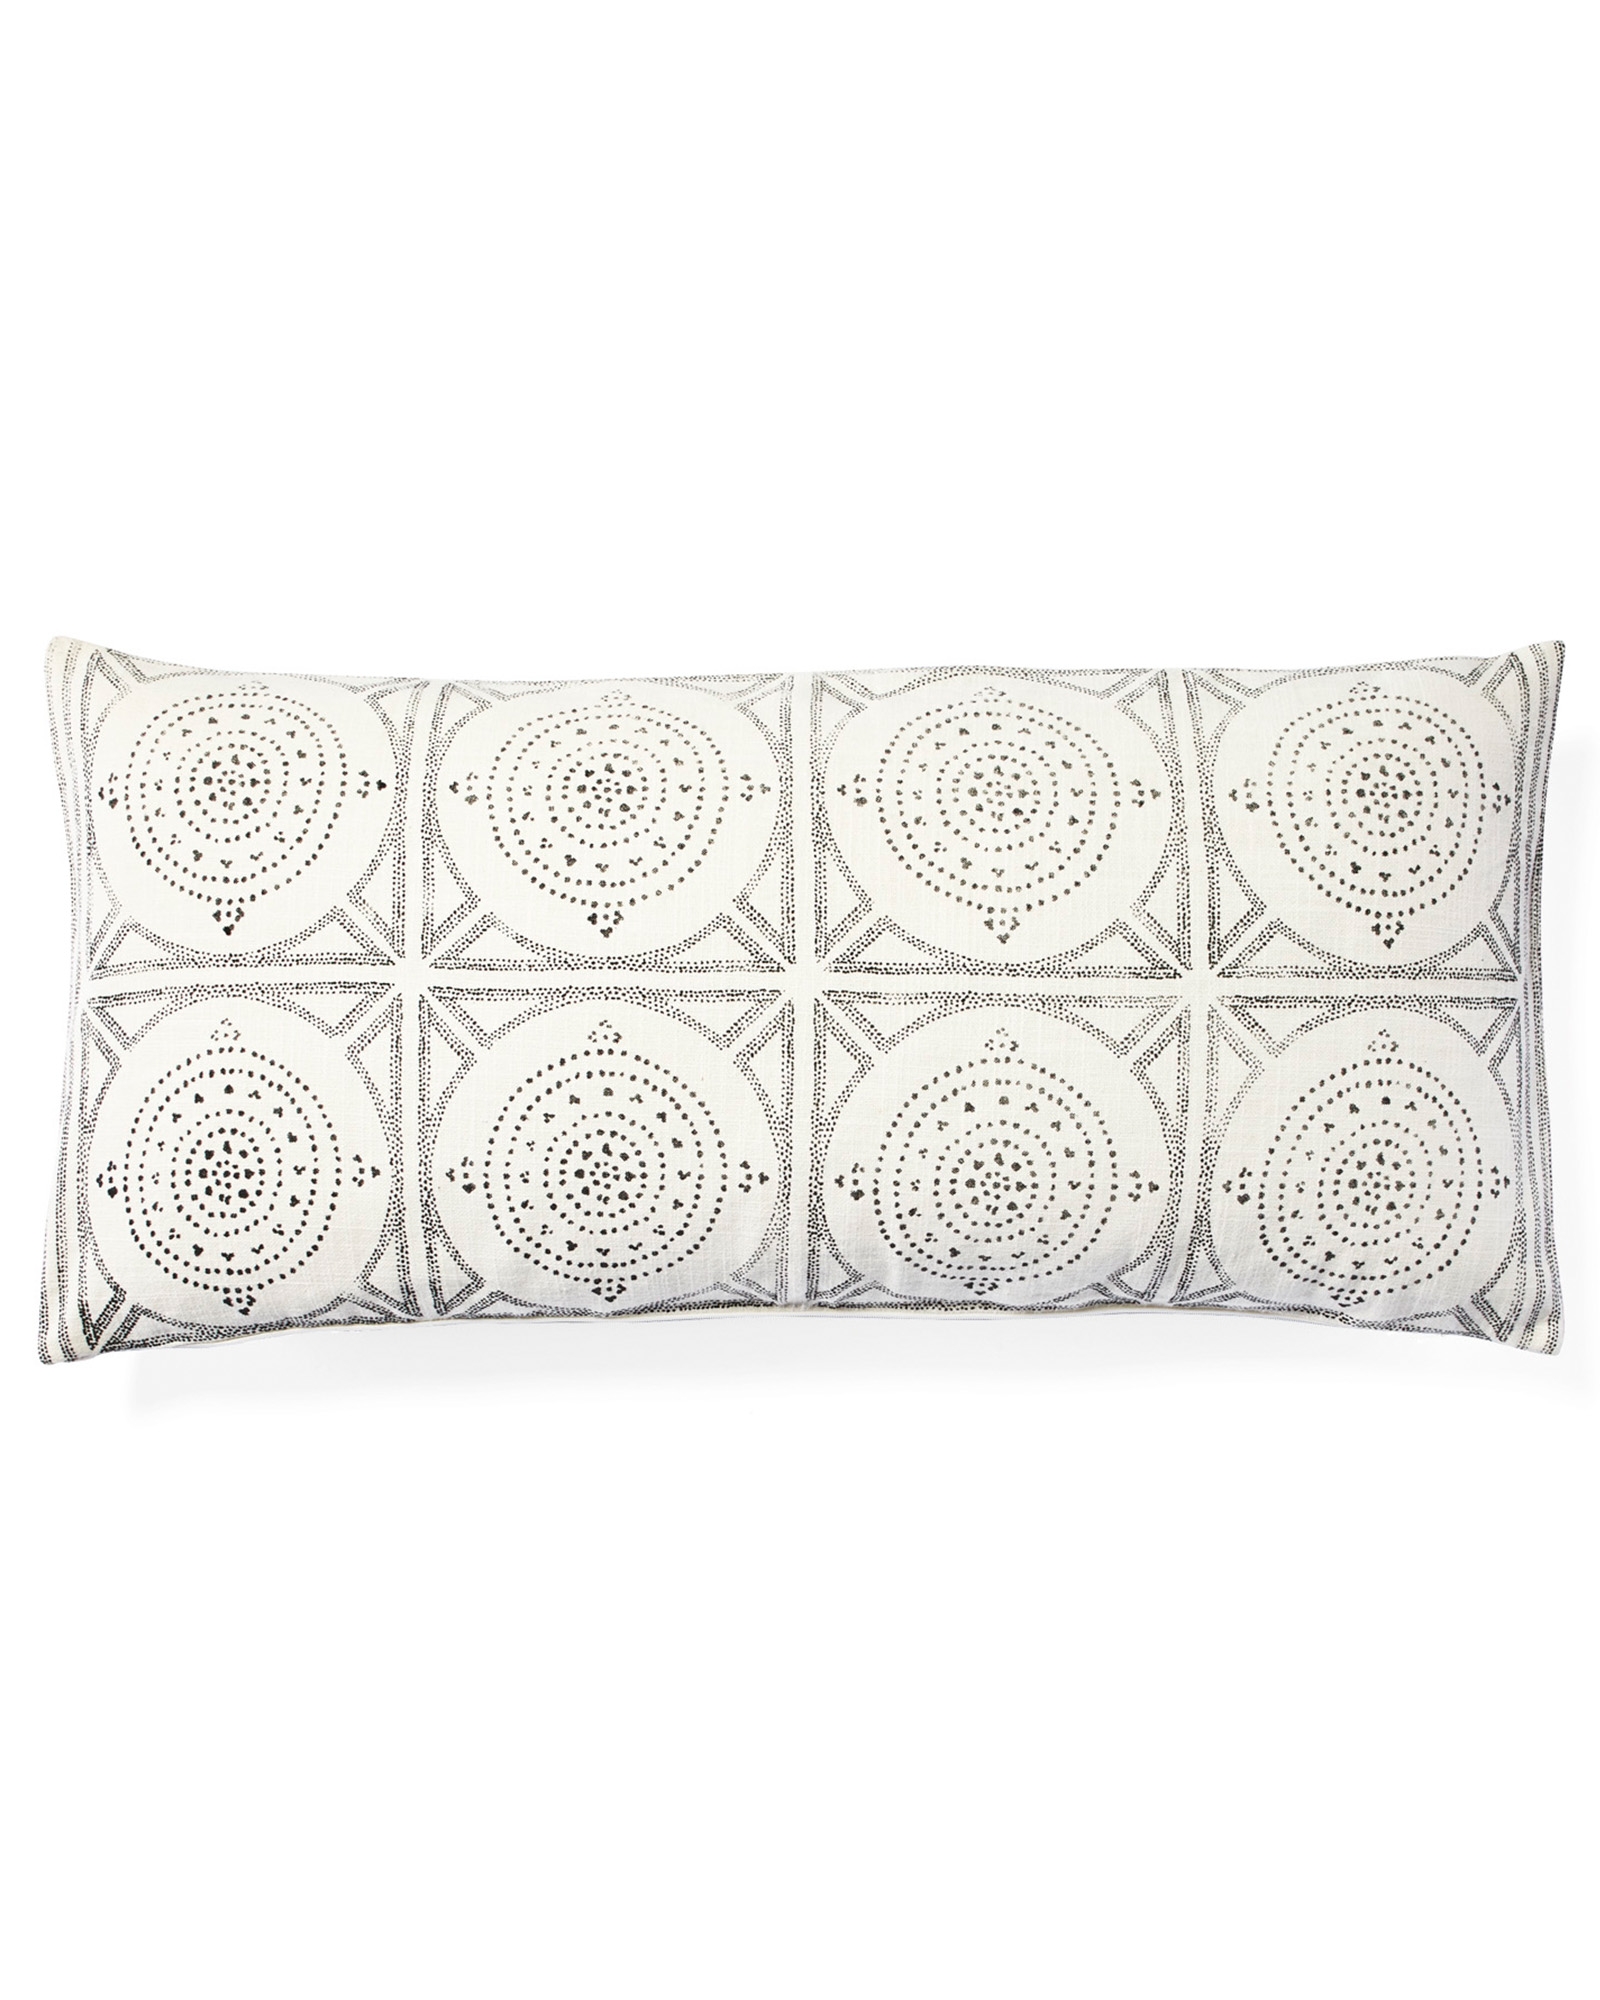 Camille Mosaic Lumbar Pillow Cover, Ivory, 30" x 14" - Image 0